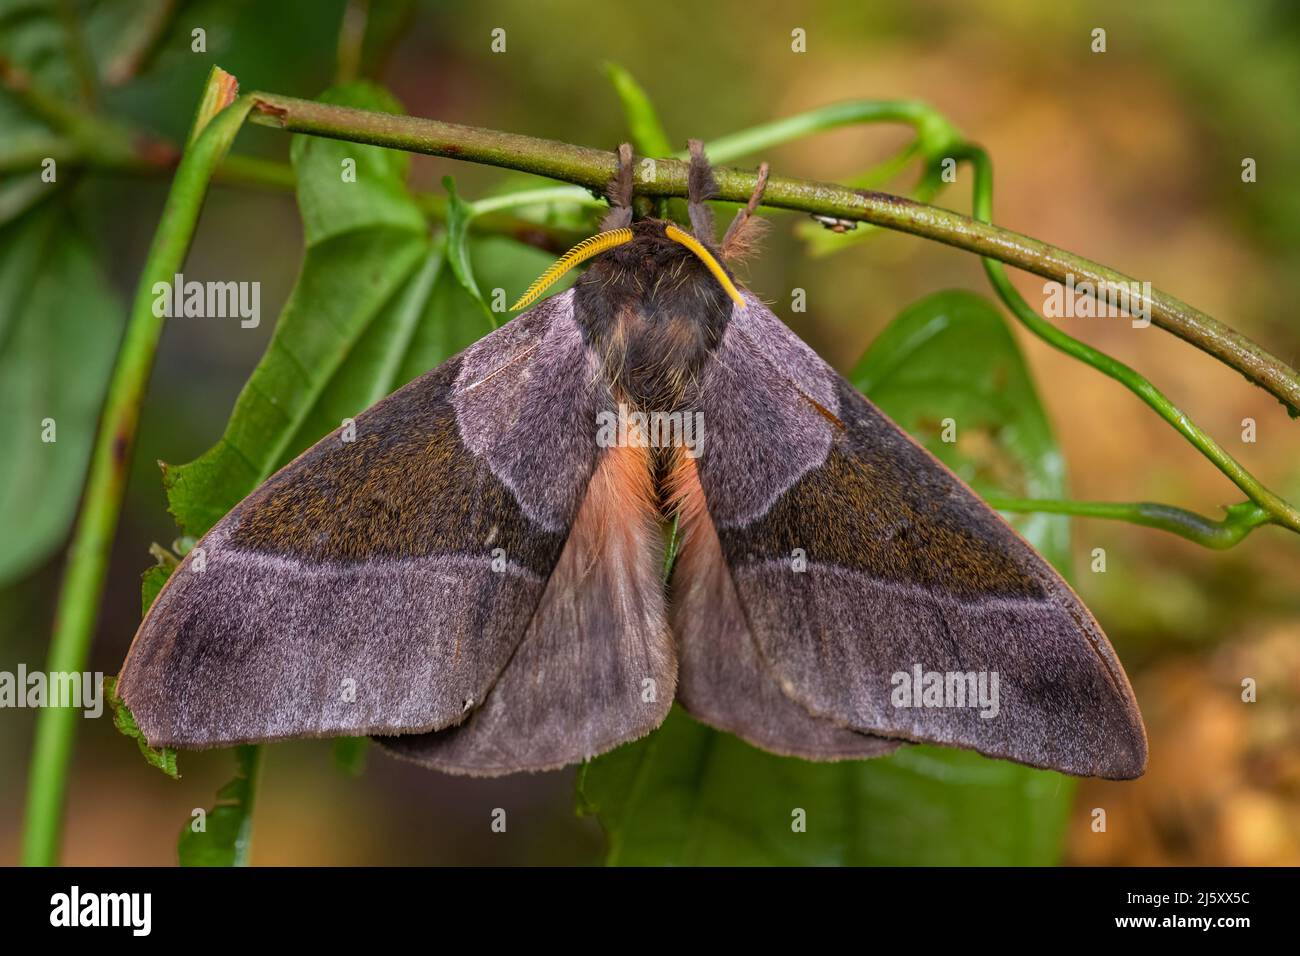 Emperor moth - Dirphia avia, beautiful large moth from South American forests and woodlands, Ecuador. Stock Photo